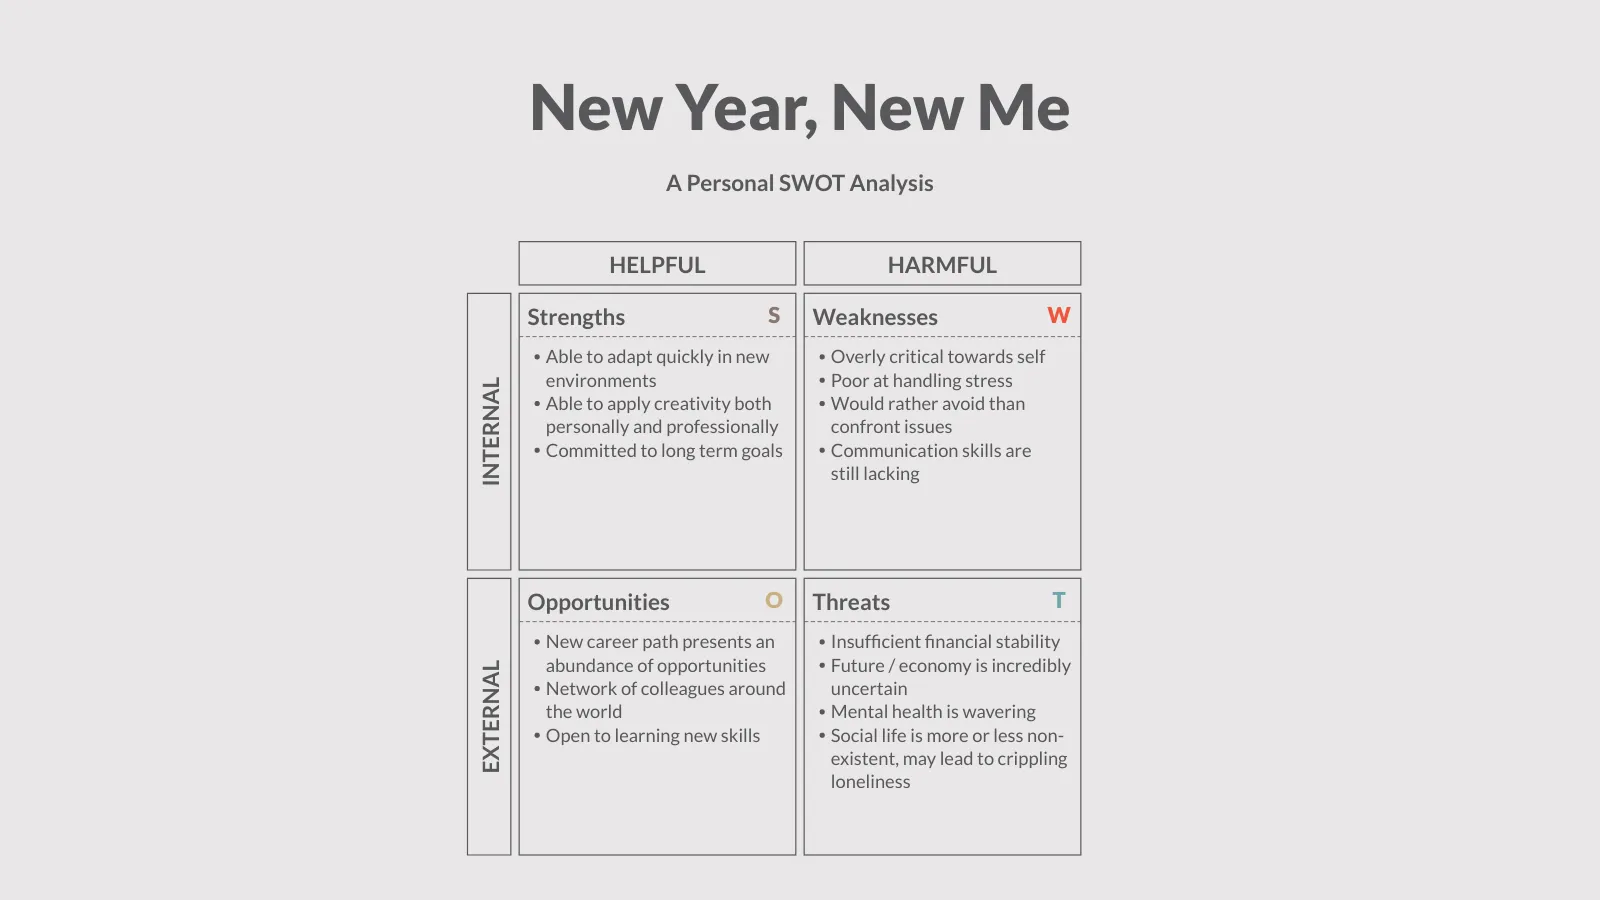 SWOT Analysis example: New Year, New Me